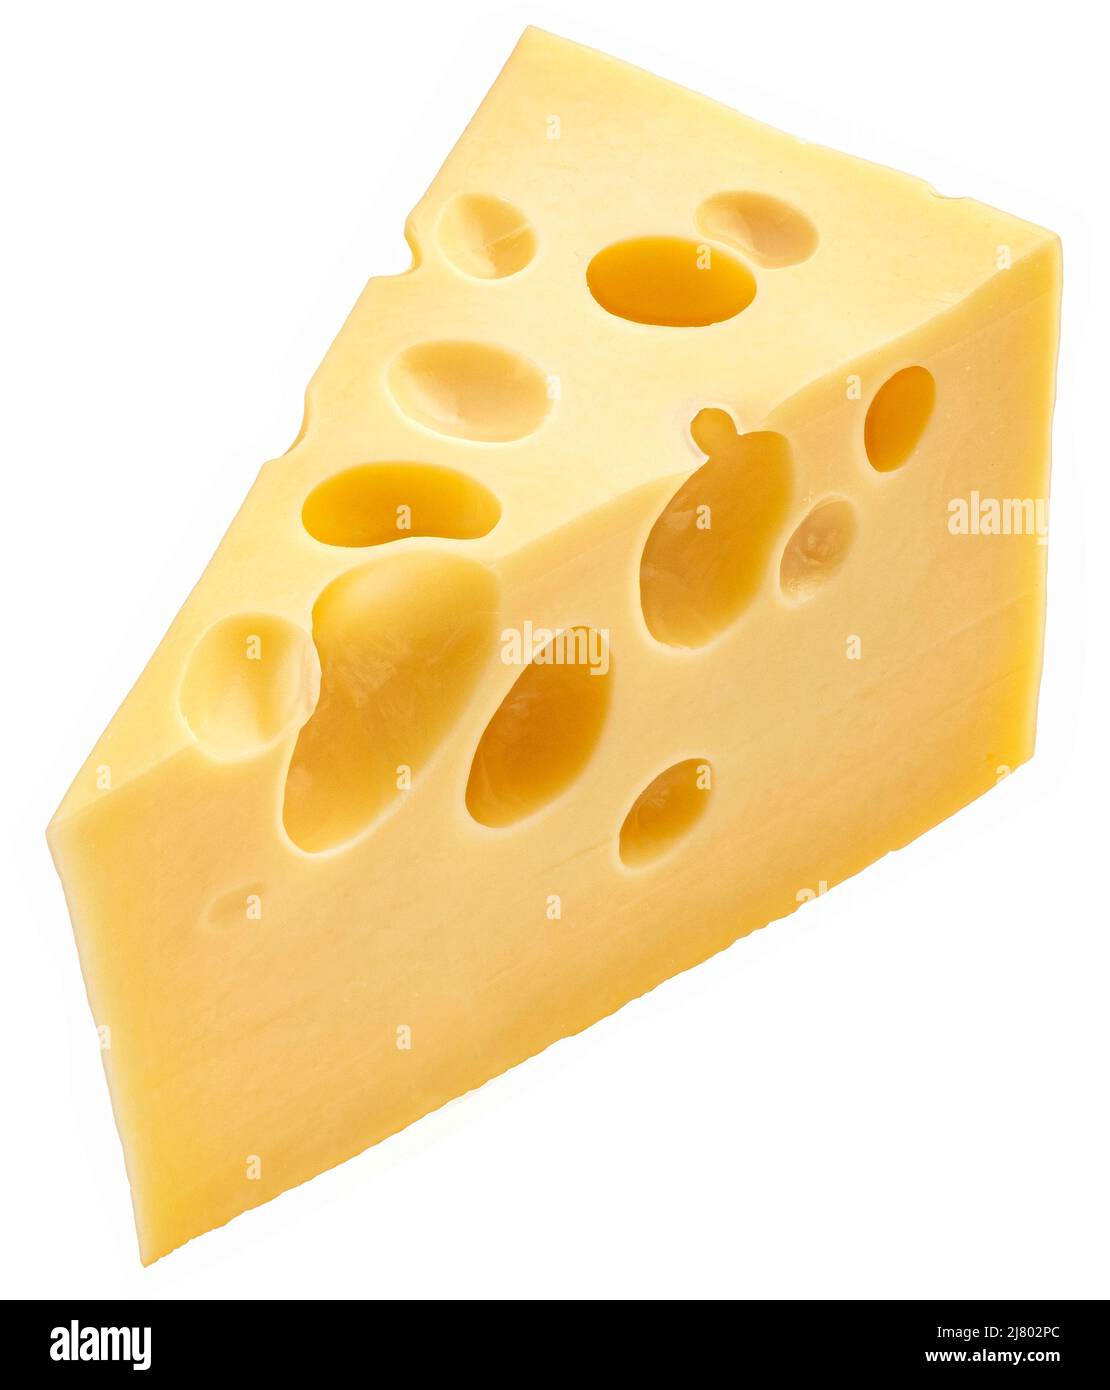 triangle shaped cheese